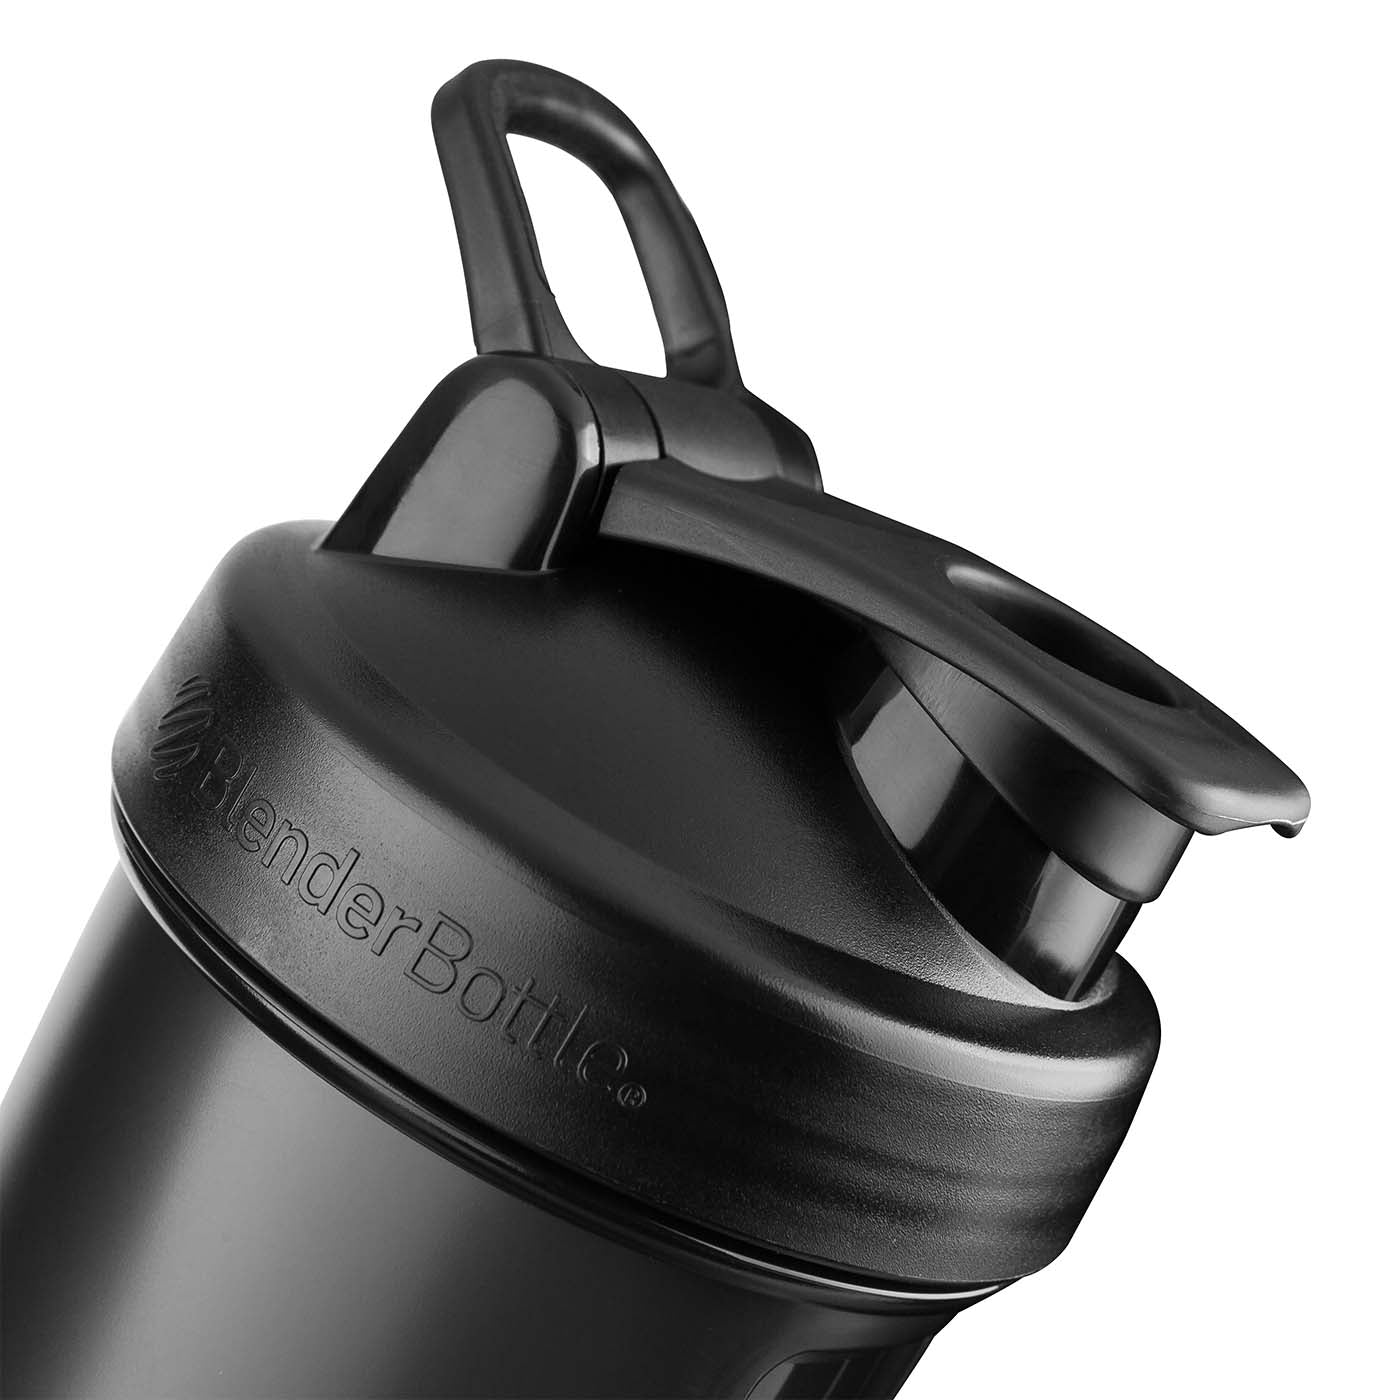 An image of the lid of a black BlenderBottle shaker bottle. The lid has a twist-on design, with a flip cap that snaps securely in place to prevent leaks and spills. The lid also features a loop for easy carrying, and a protected drinking spout that is covered by a removable cap. The image highlights the practicality and functionality of the BlenderBottle design, with the focus on the lid and its various features. The background is blurred and neutral, with the focus on the lid of the bottle.